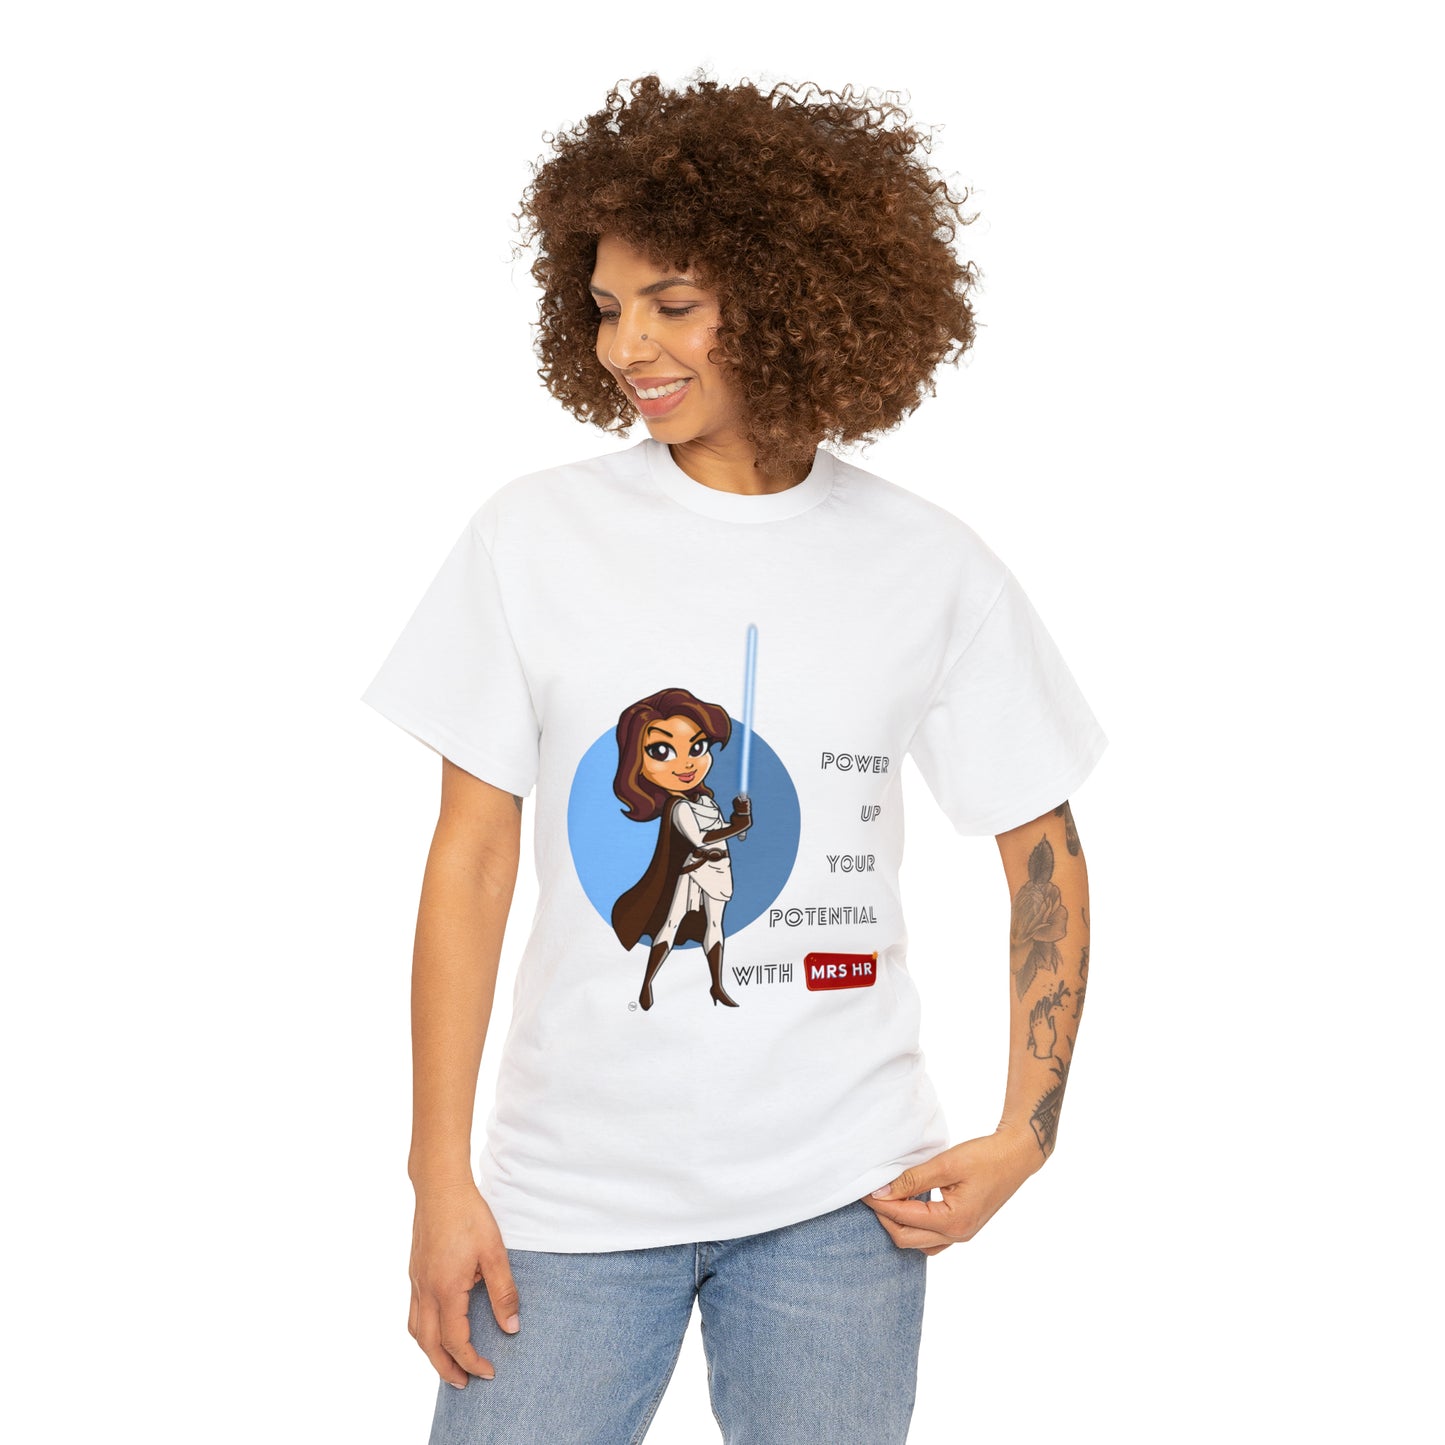 Power Up Your Potential With Mrs HR Cotton Tee